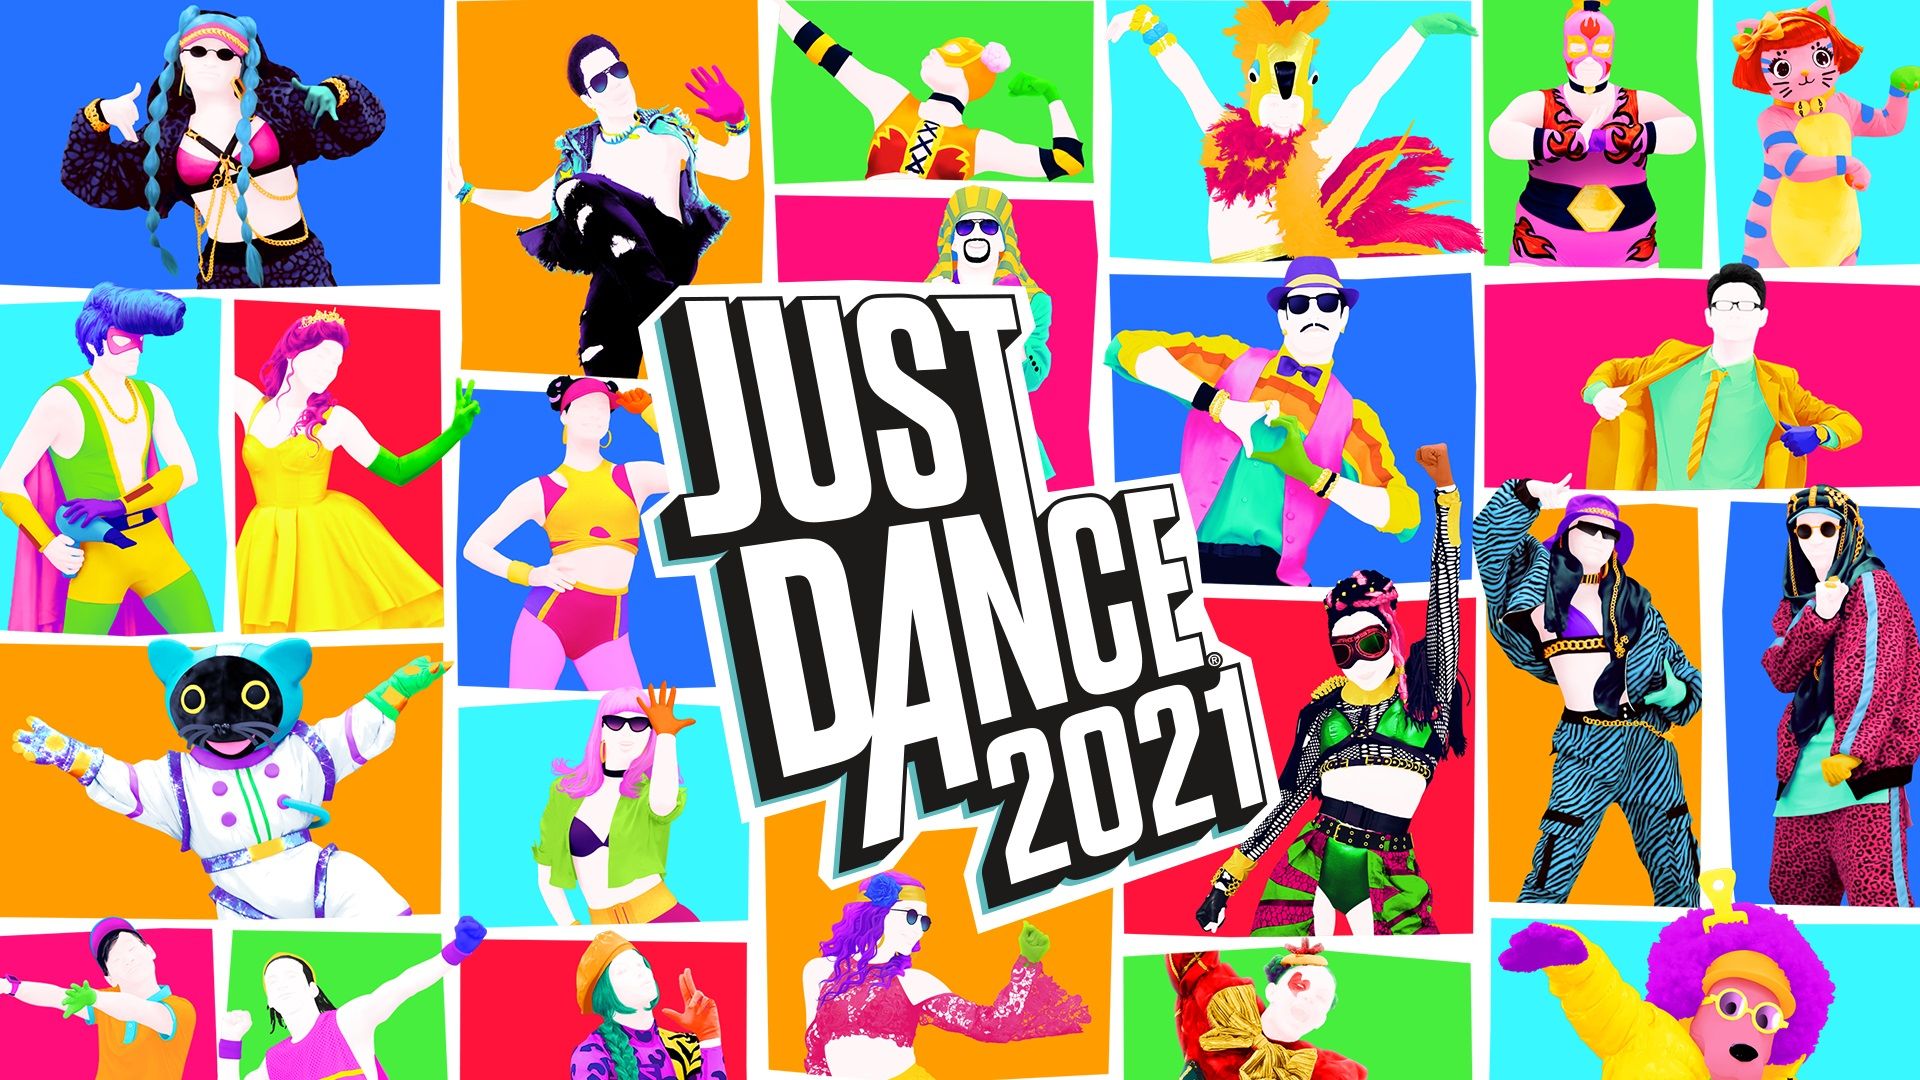 Images, Screens, Artworks de Just Dance 2021 sur PS Xbox One, PS Xbox Series X, Stadia, Switch @JVL